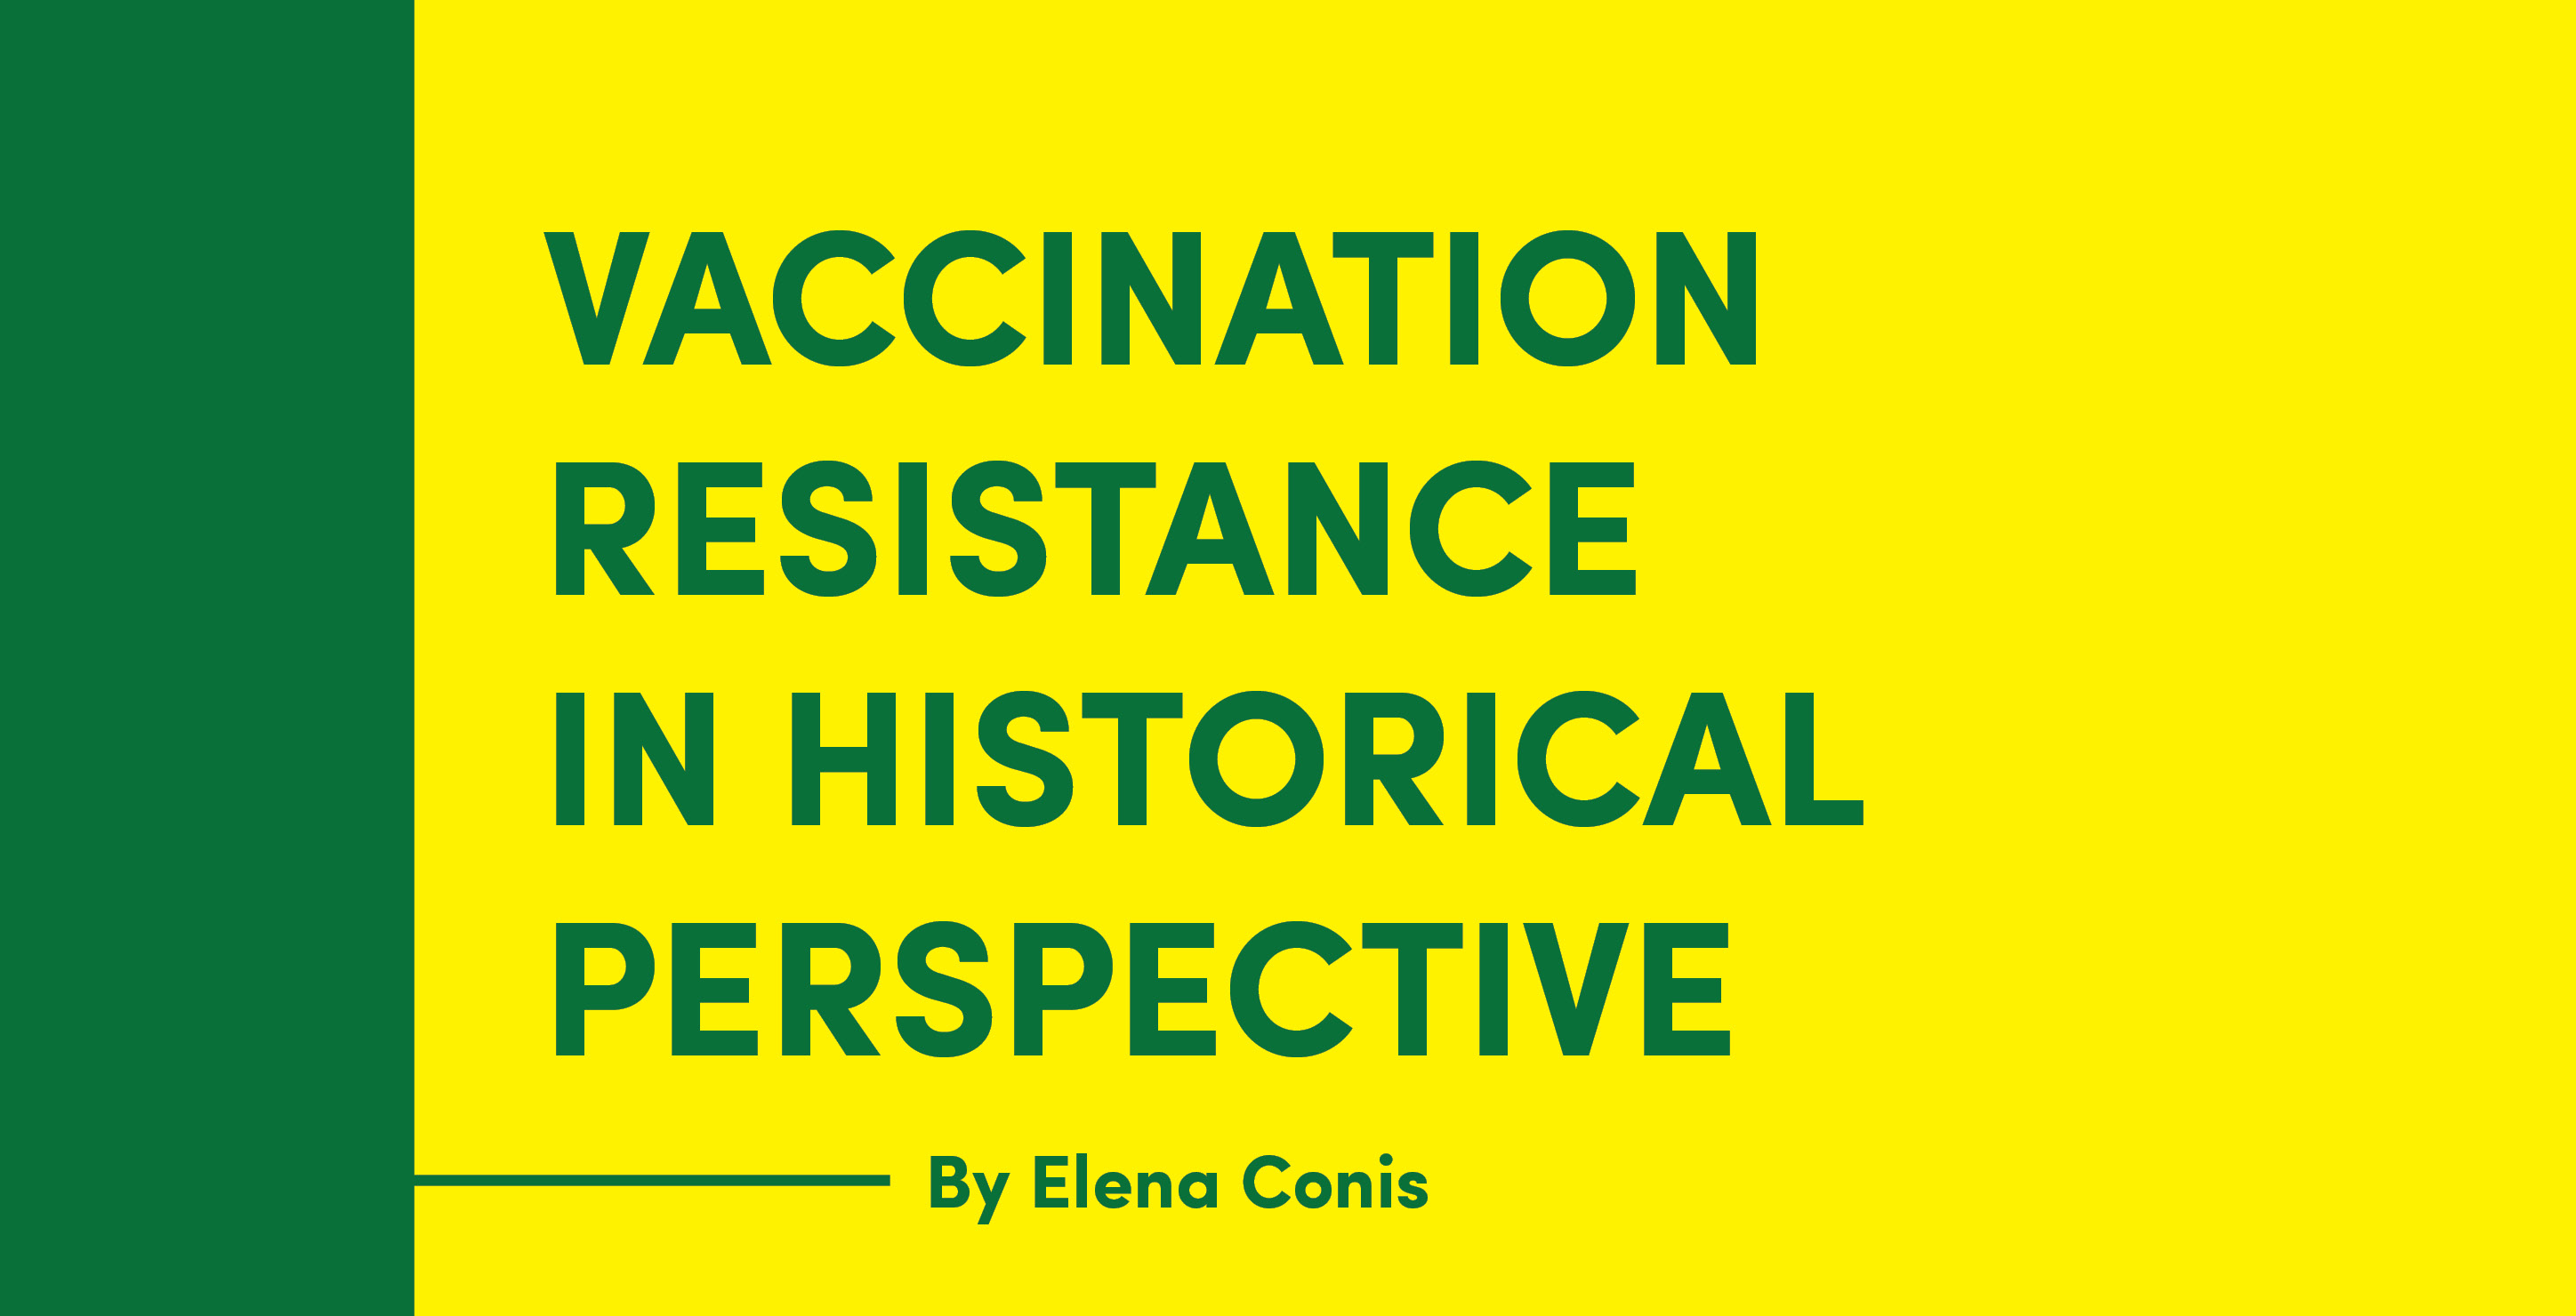 The cover of Conis' Vaccination Resistance in Historical Perspective, which is a yellow background with green text